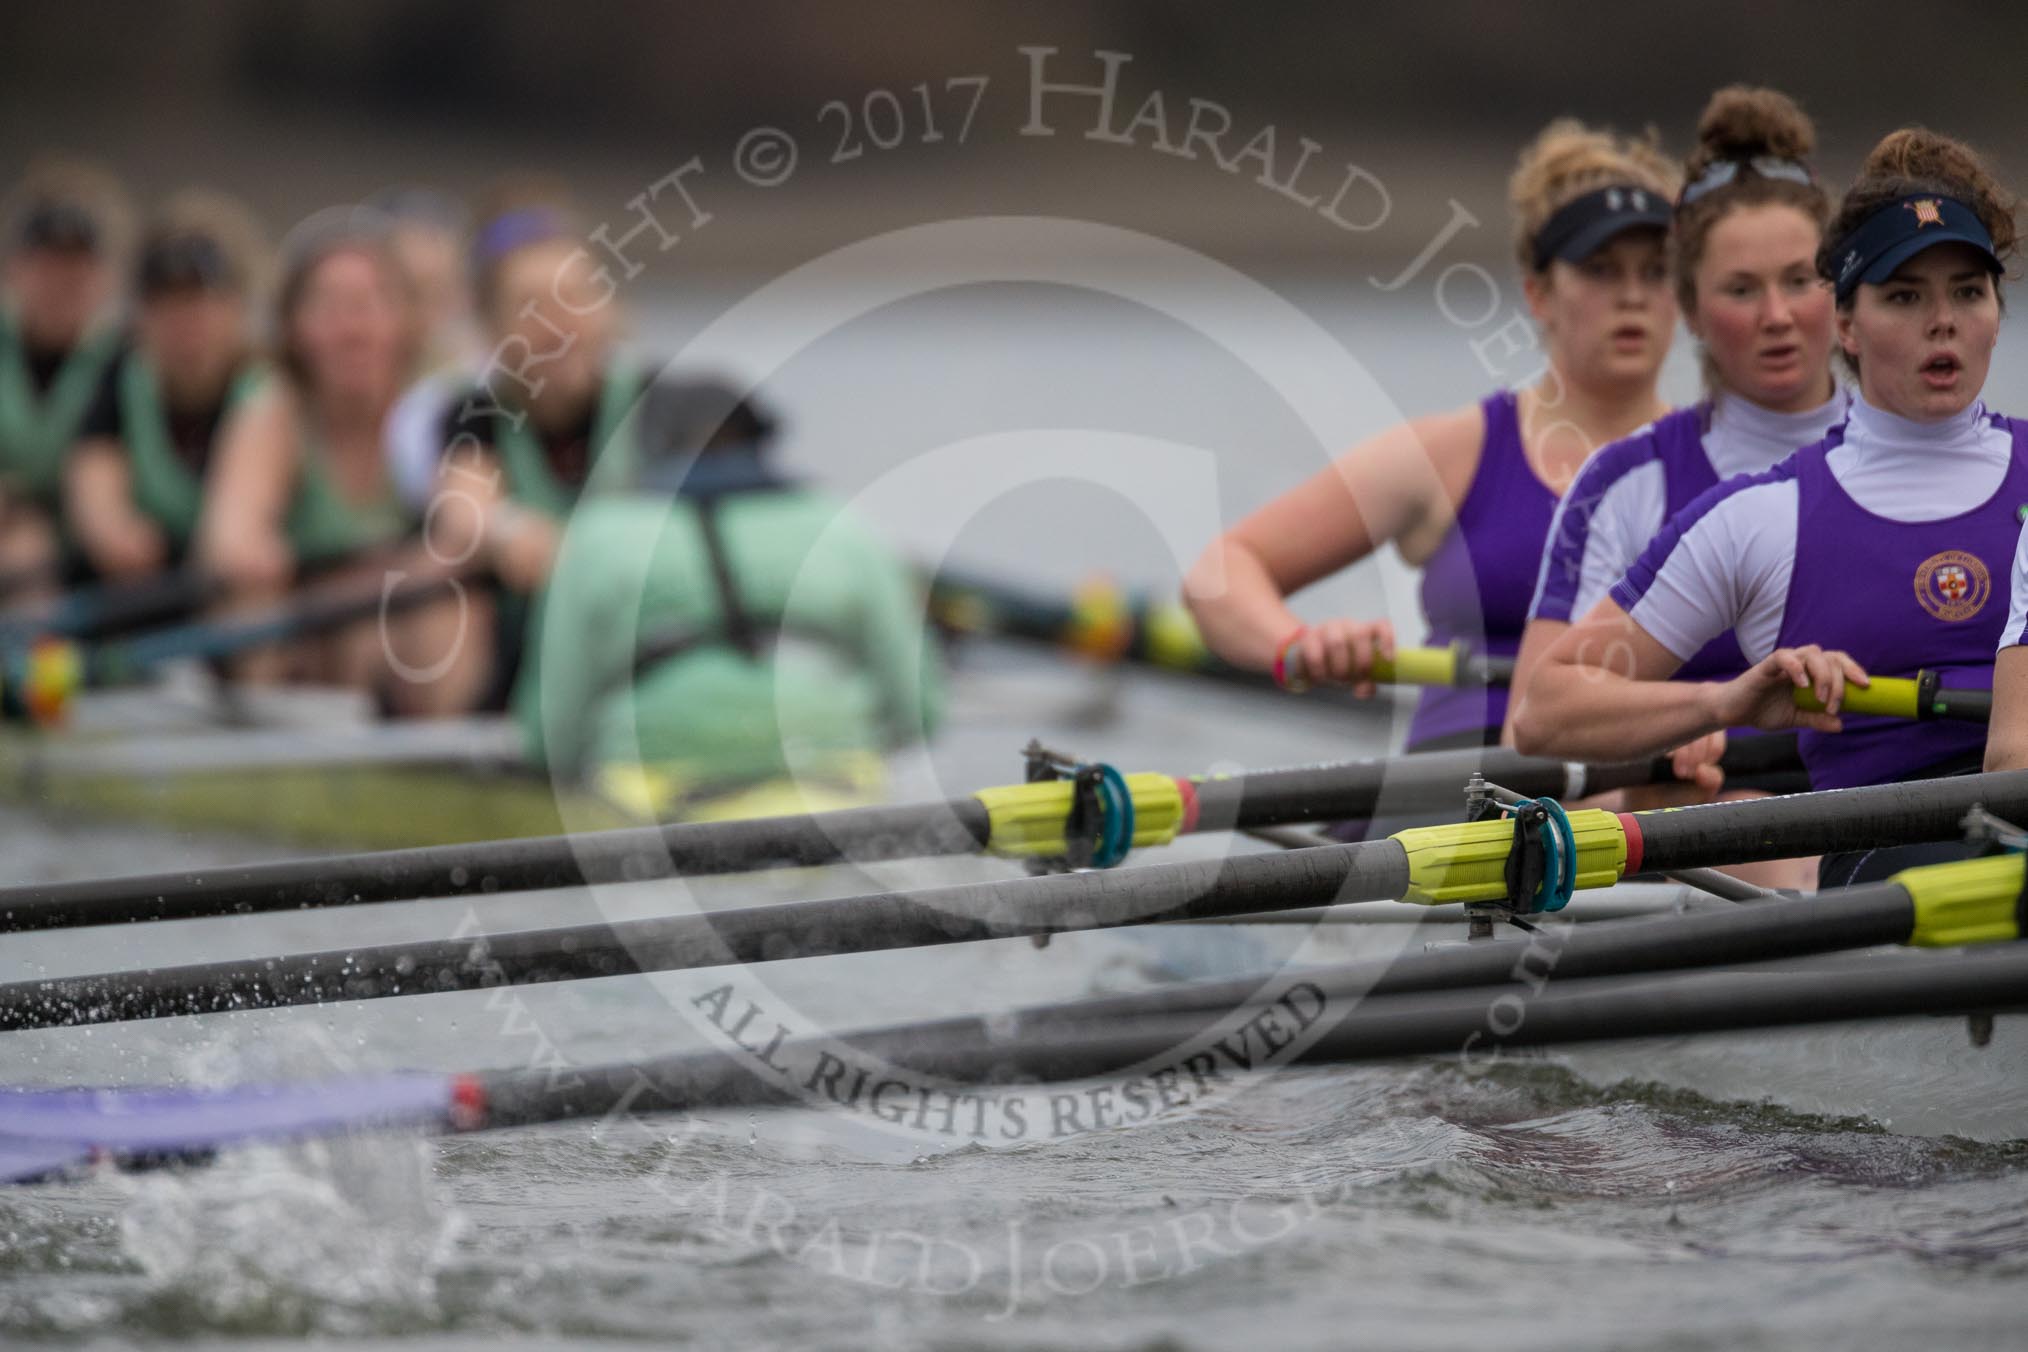 The Boat Race season 2017 - Women's Boat Race Fixture CUWBC vs Univerity of London: The CUWBC boat has taken the lead by at least one length.
River Thames between Putney Bridge and Mortlake,
London SW15,

United Kingdom,
on 19 February 2017 at 16:04, image #78